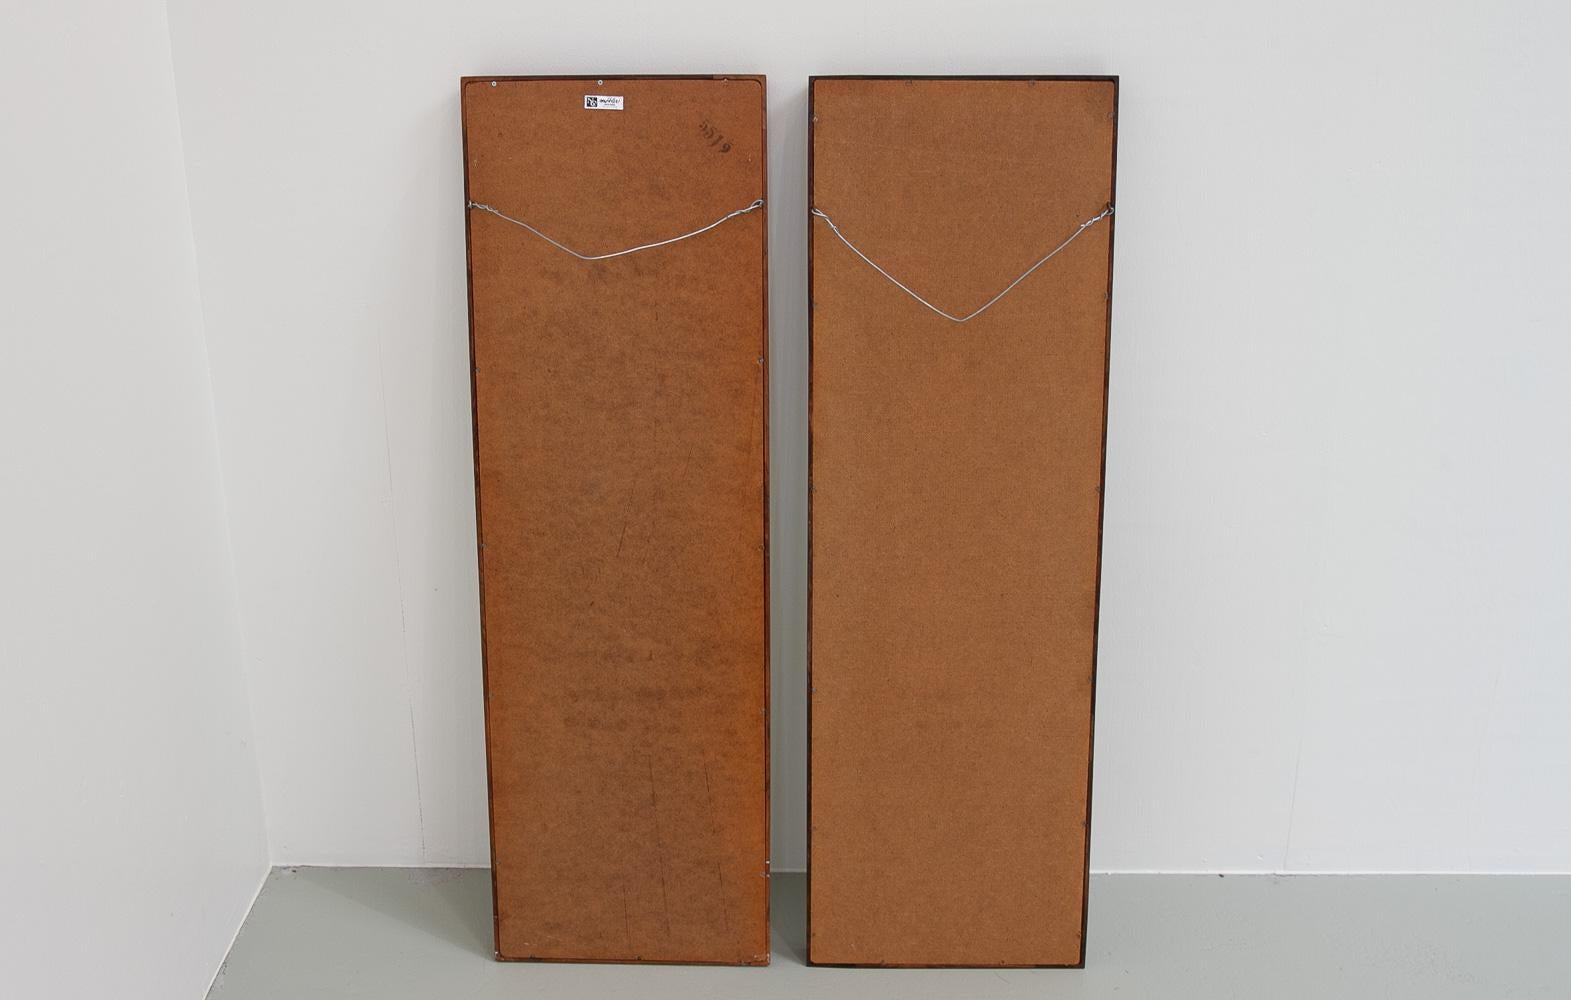 Danish Modern Rosewood Mirrors by Niels Clausen for NC Møbler, 1960s. Set of 2. For Sale 3